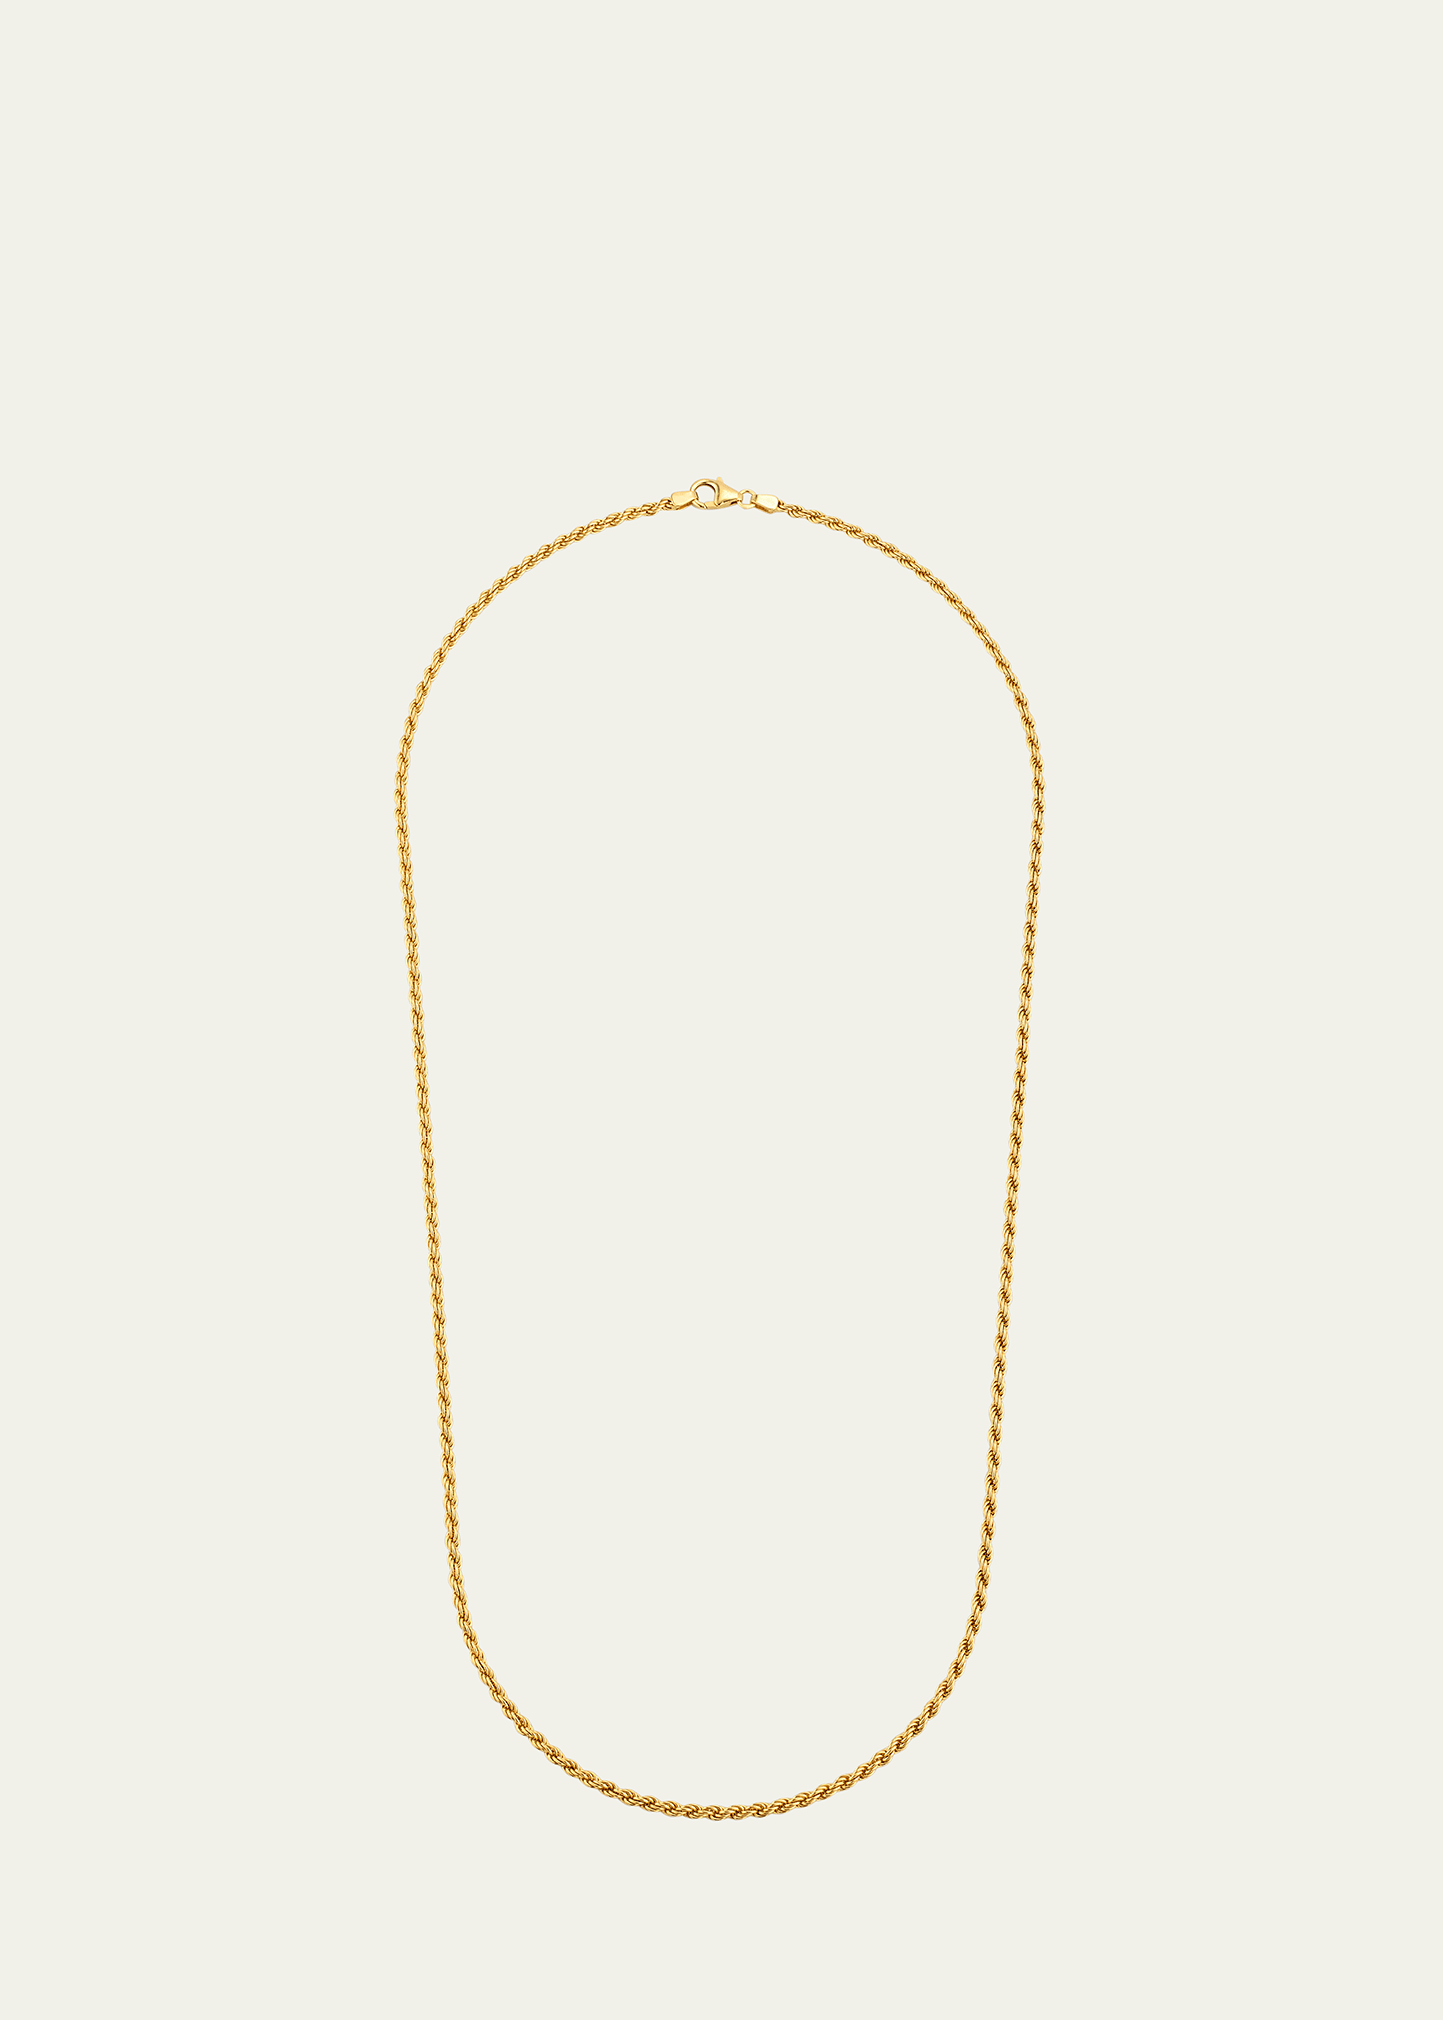 Men's 14K Yellow Gold Rope Chain Necklace, 24in